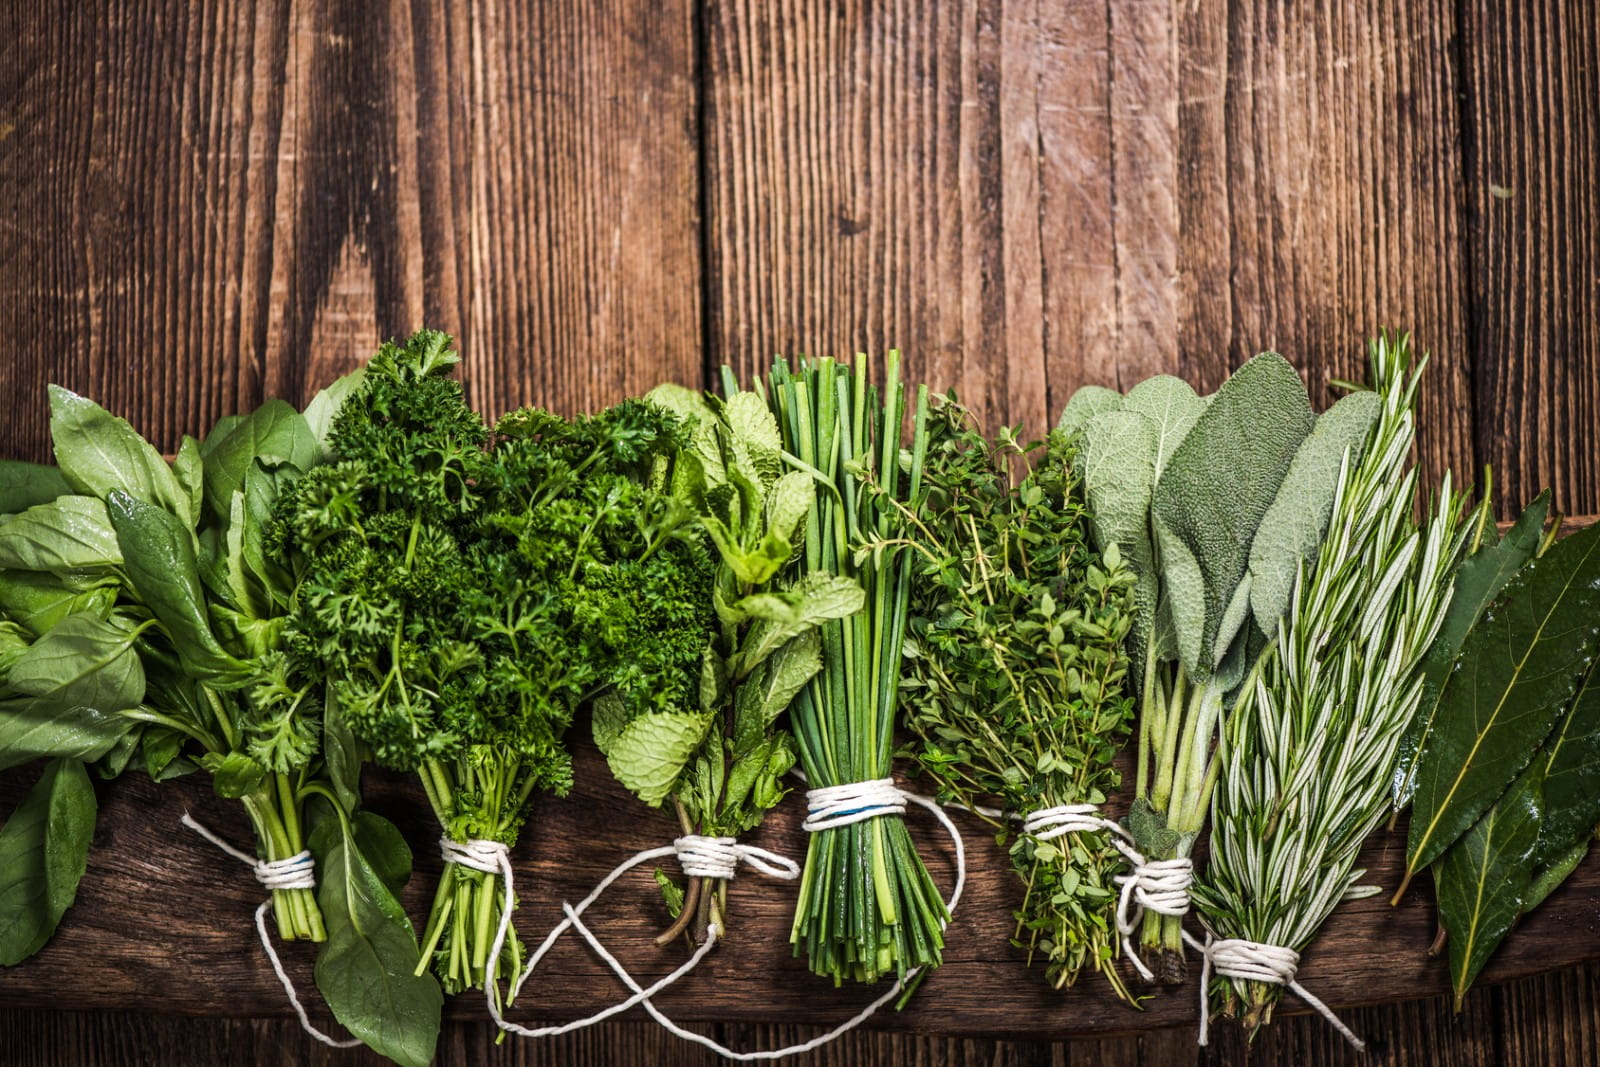 What wine (or other drinks) should you pair with herbs?